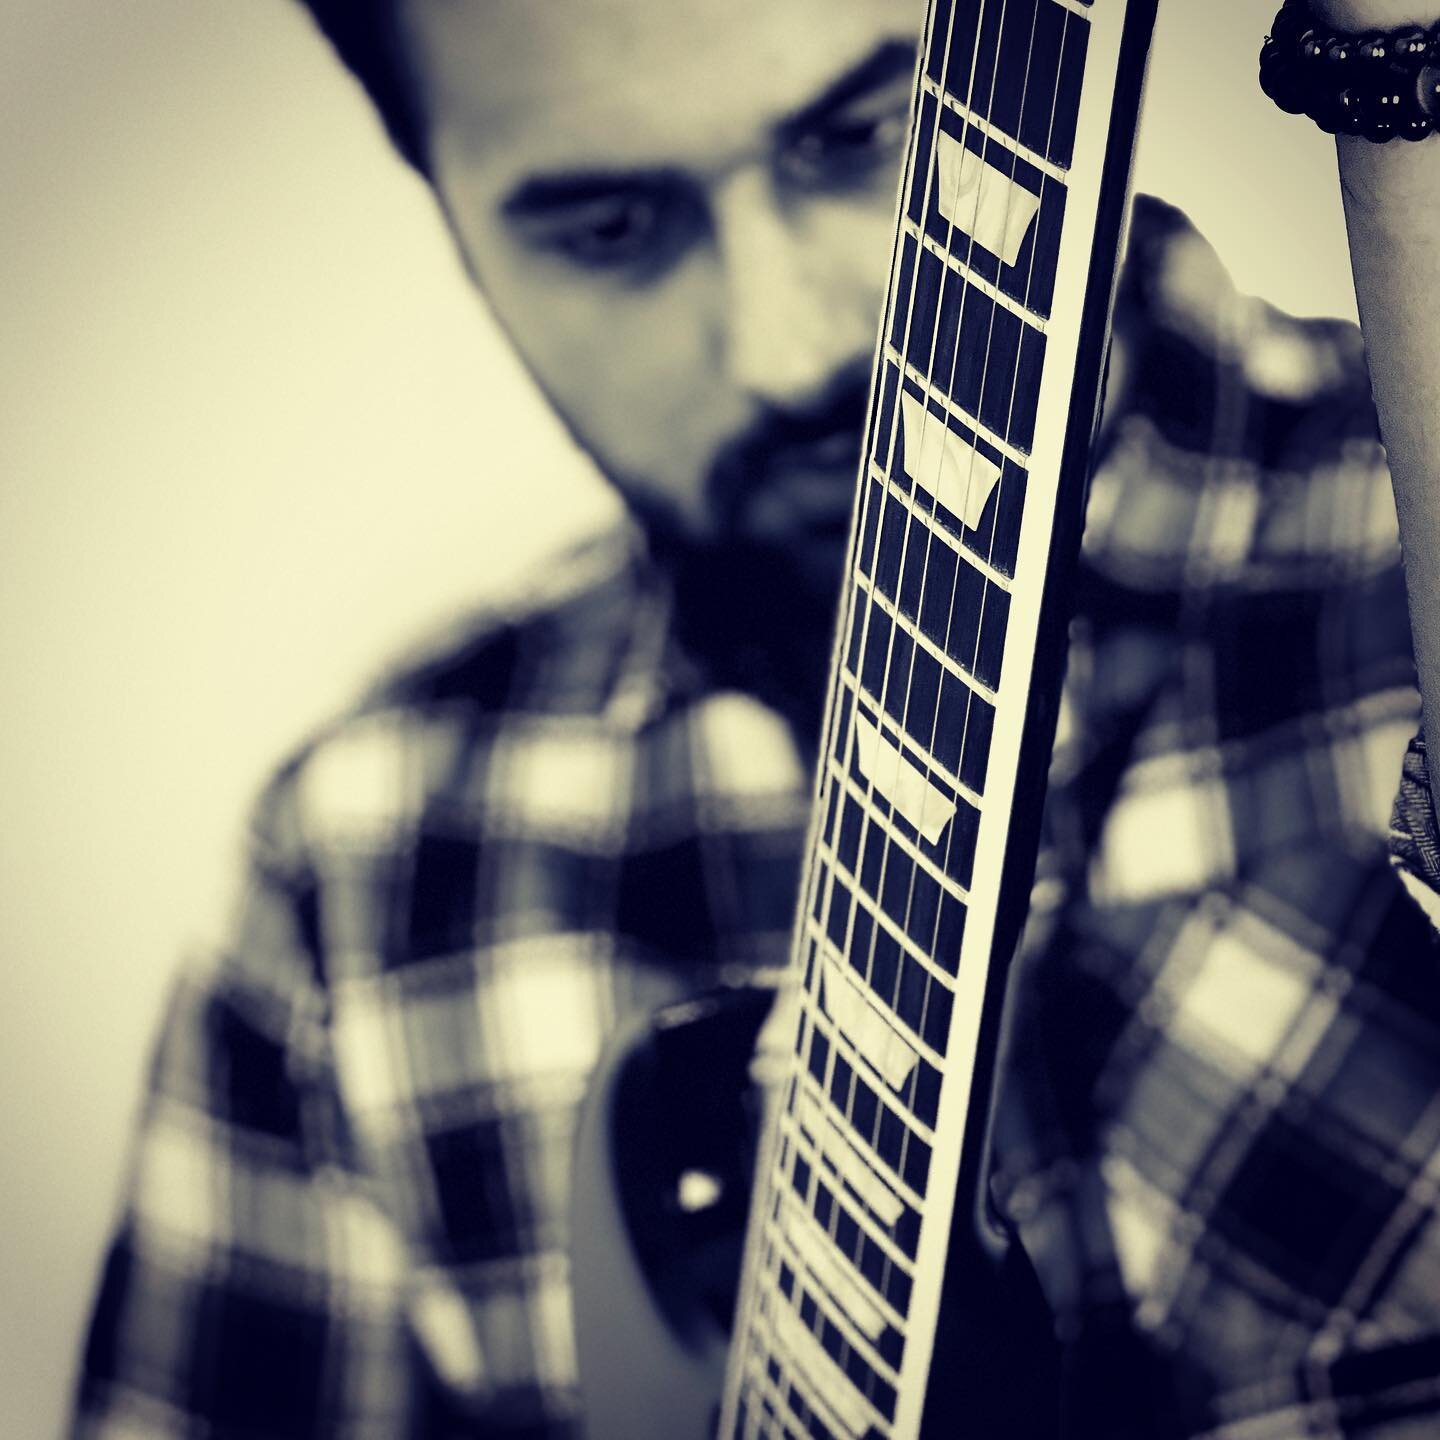 Me and my #gibson . #music #guitar #gibsonguitars #musician #electricguitar #electricguitars #gibsonsg #gibsonlespaul #londonmusic #londonmusicscene #londonmusicians #rocknroll #gibsoncustom #soul #vibe #songwriter #songwriters #songwritersofinstagra